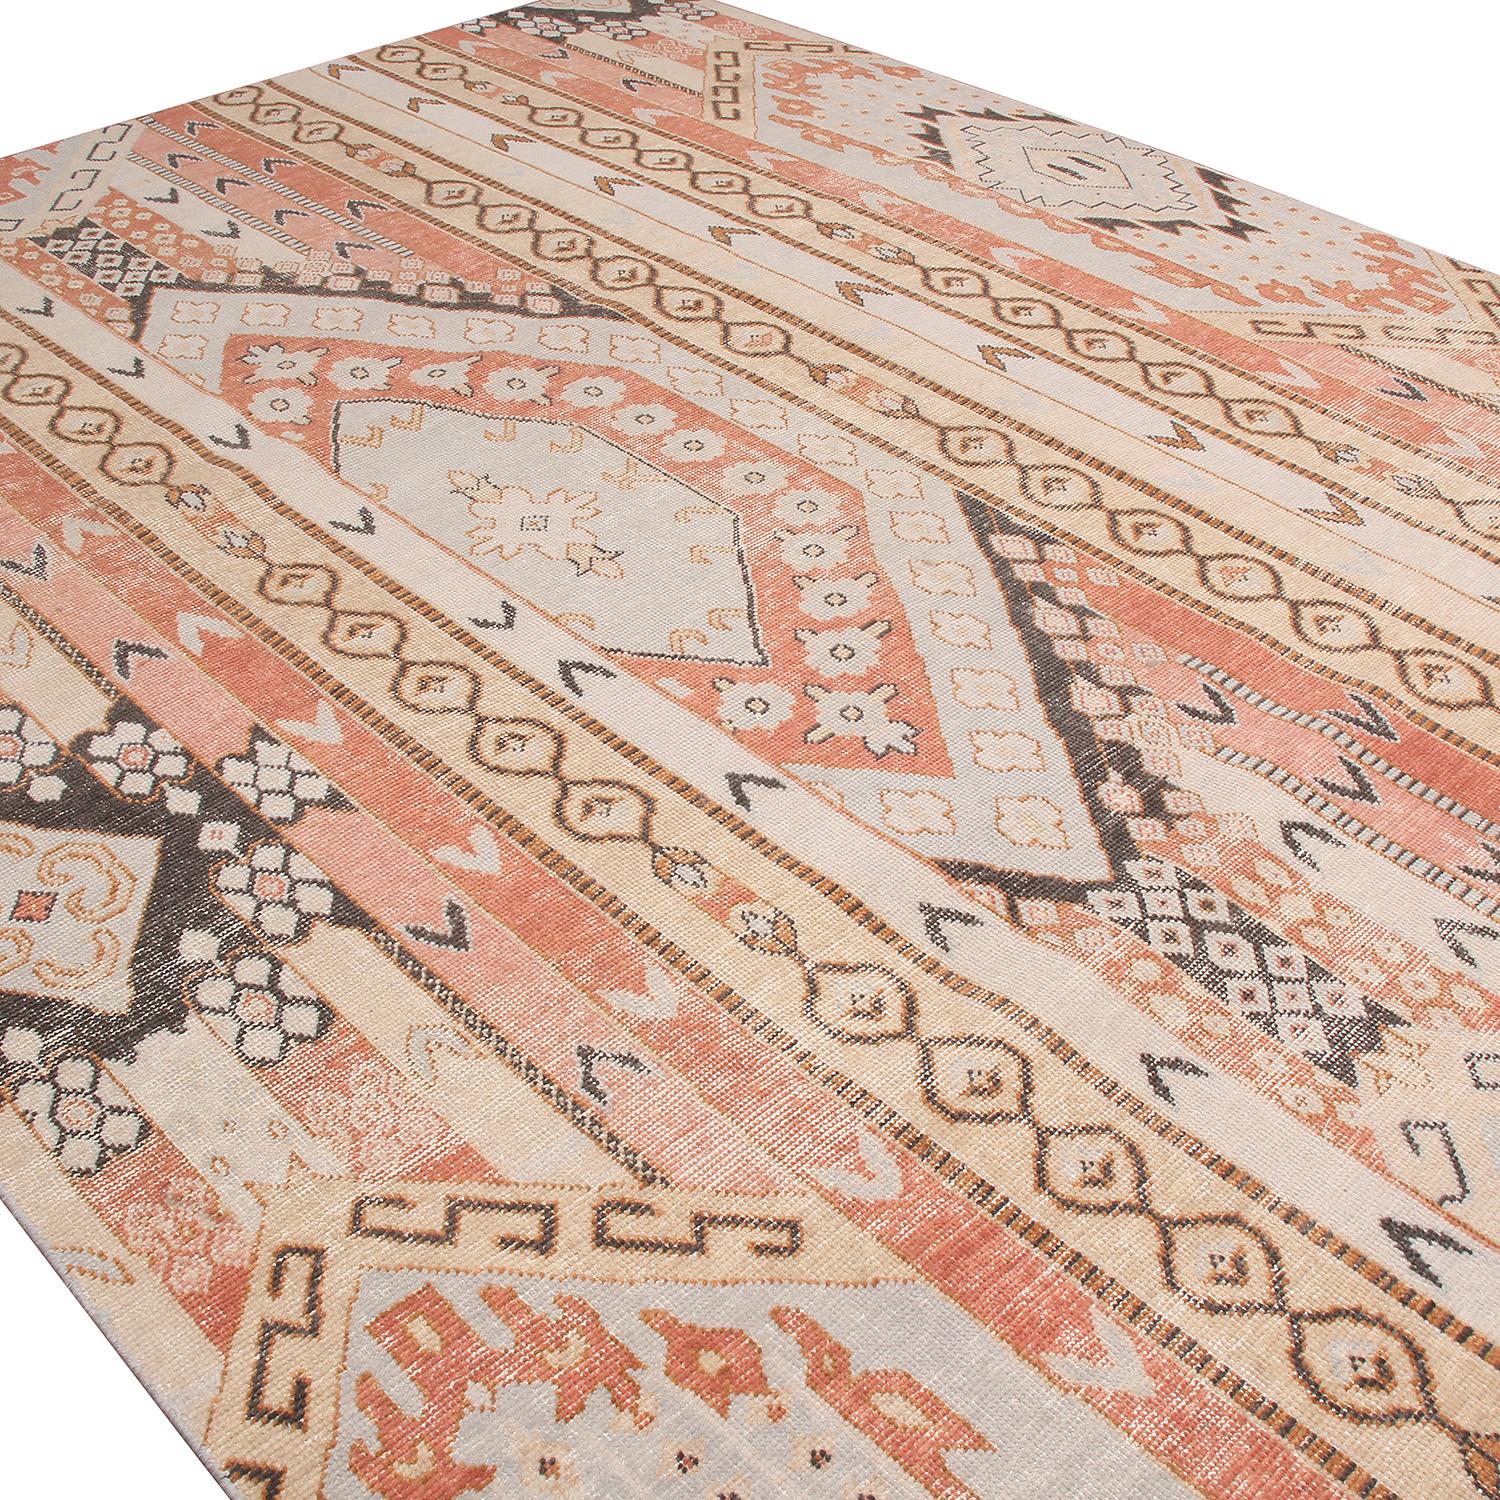 Indian Rug & Kilim’s Beige Blue and Russet Red Wool Rug from the Homage Collection For Sale